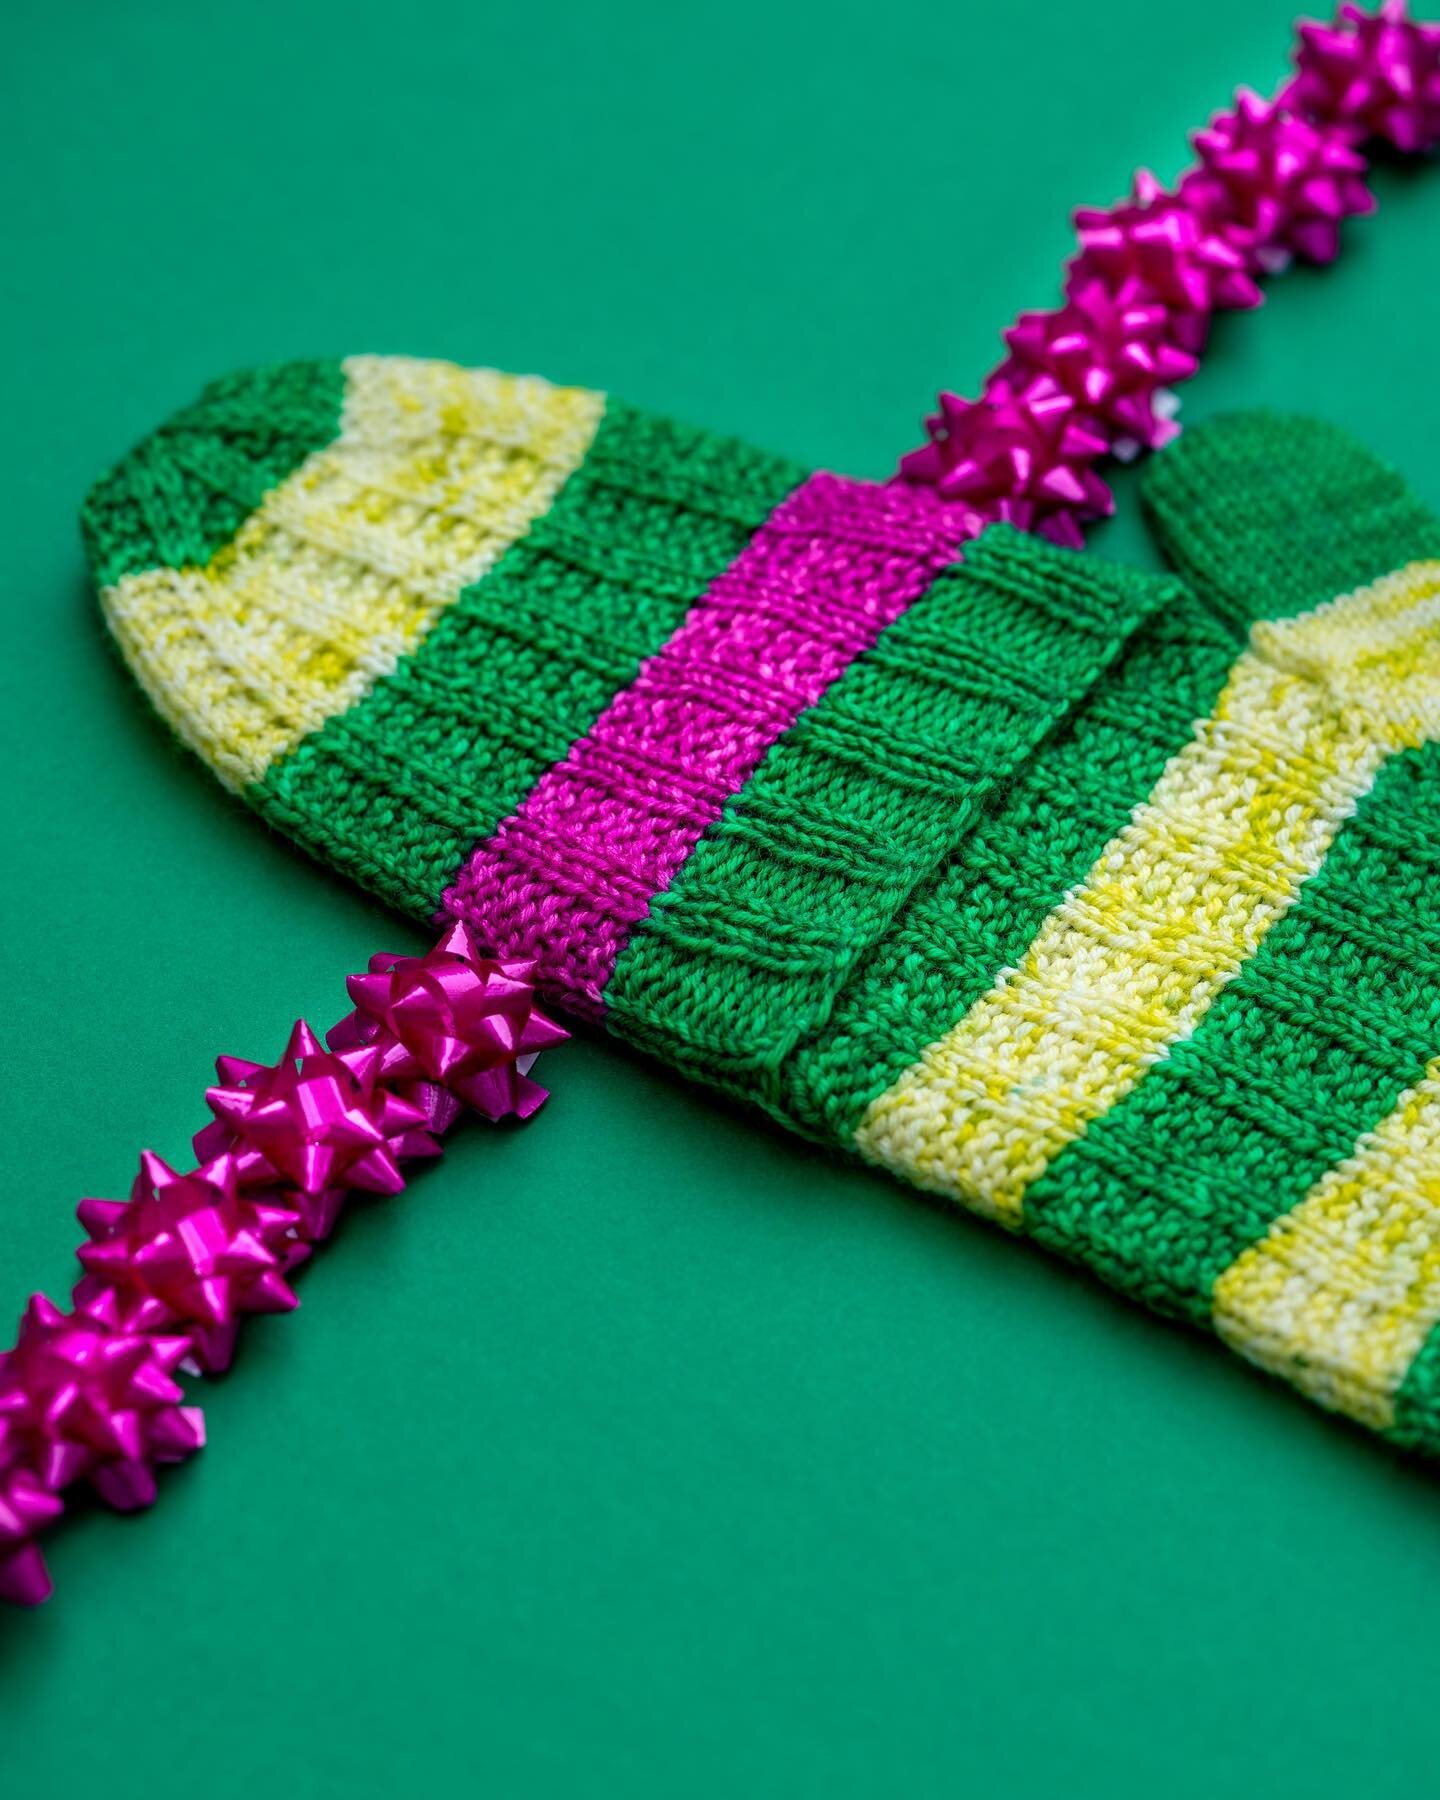 Quick reminder: TODAY IS THE LAST DAY to get the Gift Box mitt pattern for 50% off with coupon code GIFTMITT. Links in profile.

This pattern includes instructions for full mittens, convertible mittens (like these), and fingerless mitts in sizes chil